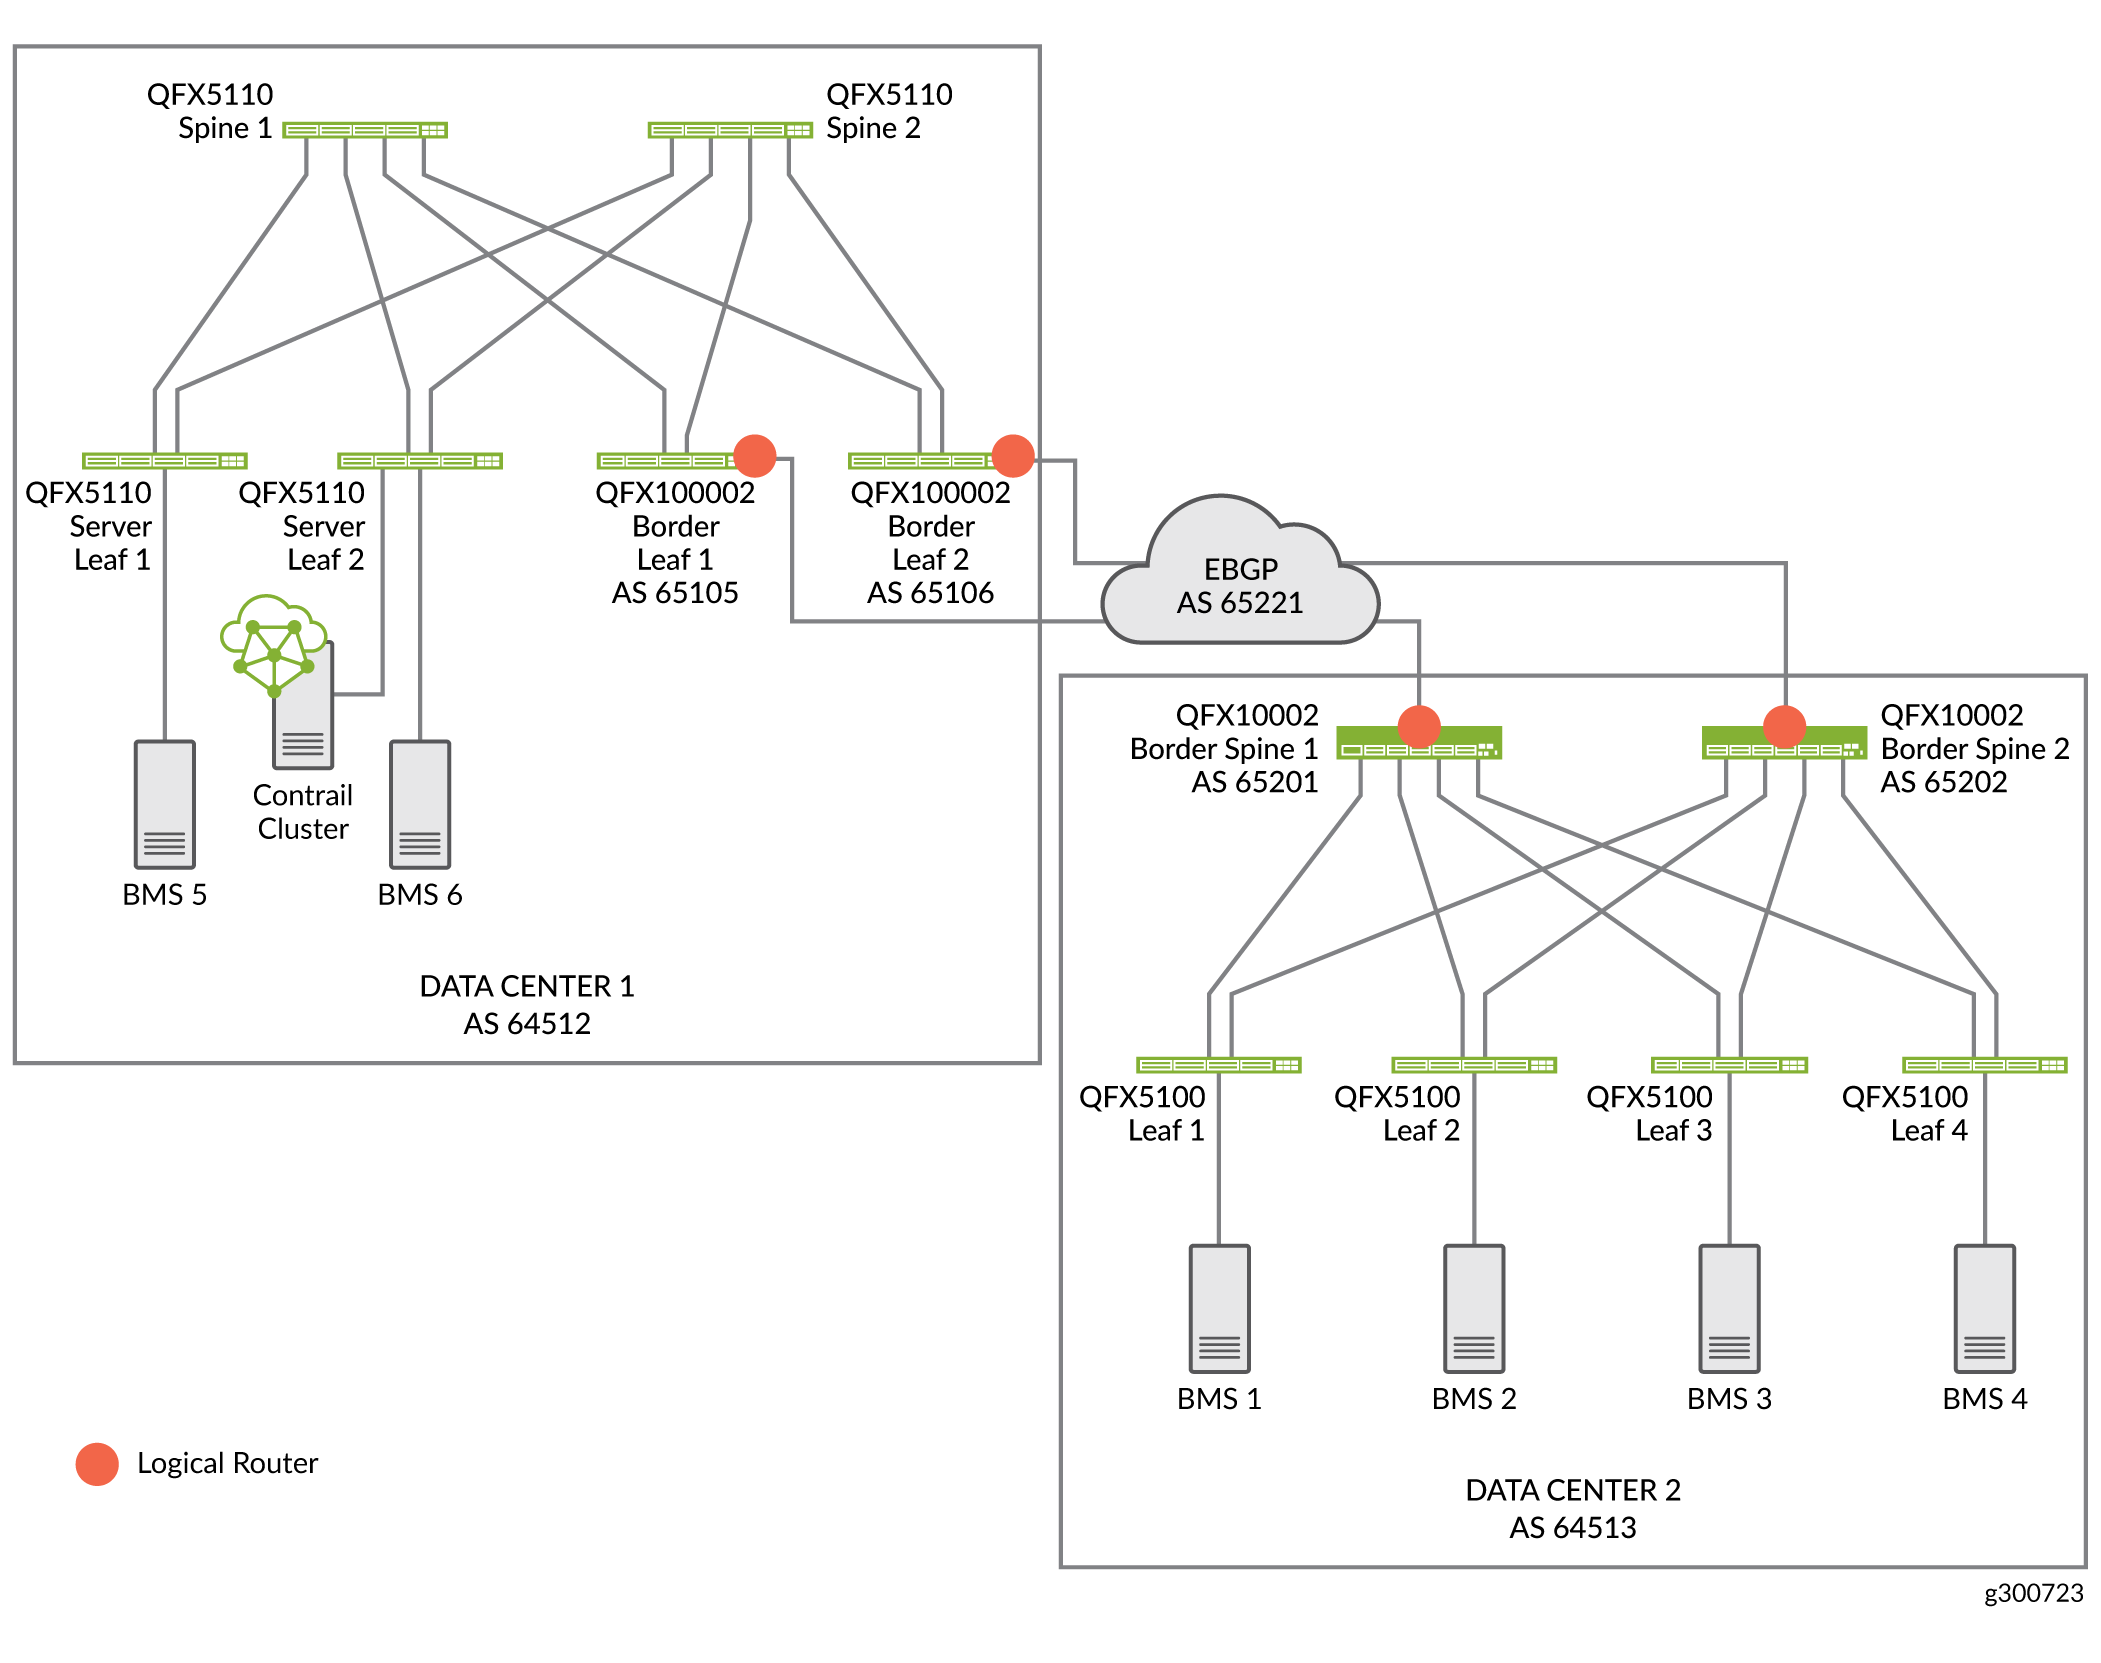 Data Center Interconnect Between
DC1 and DC2